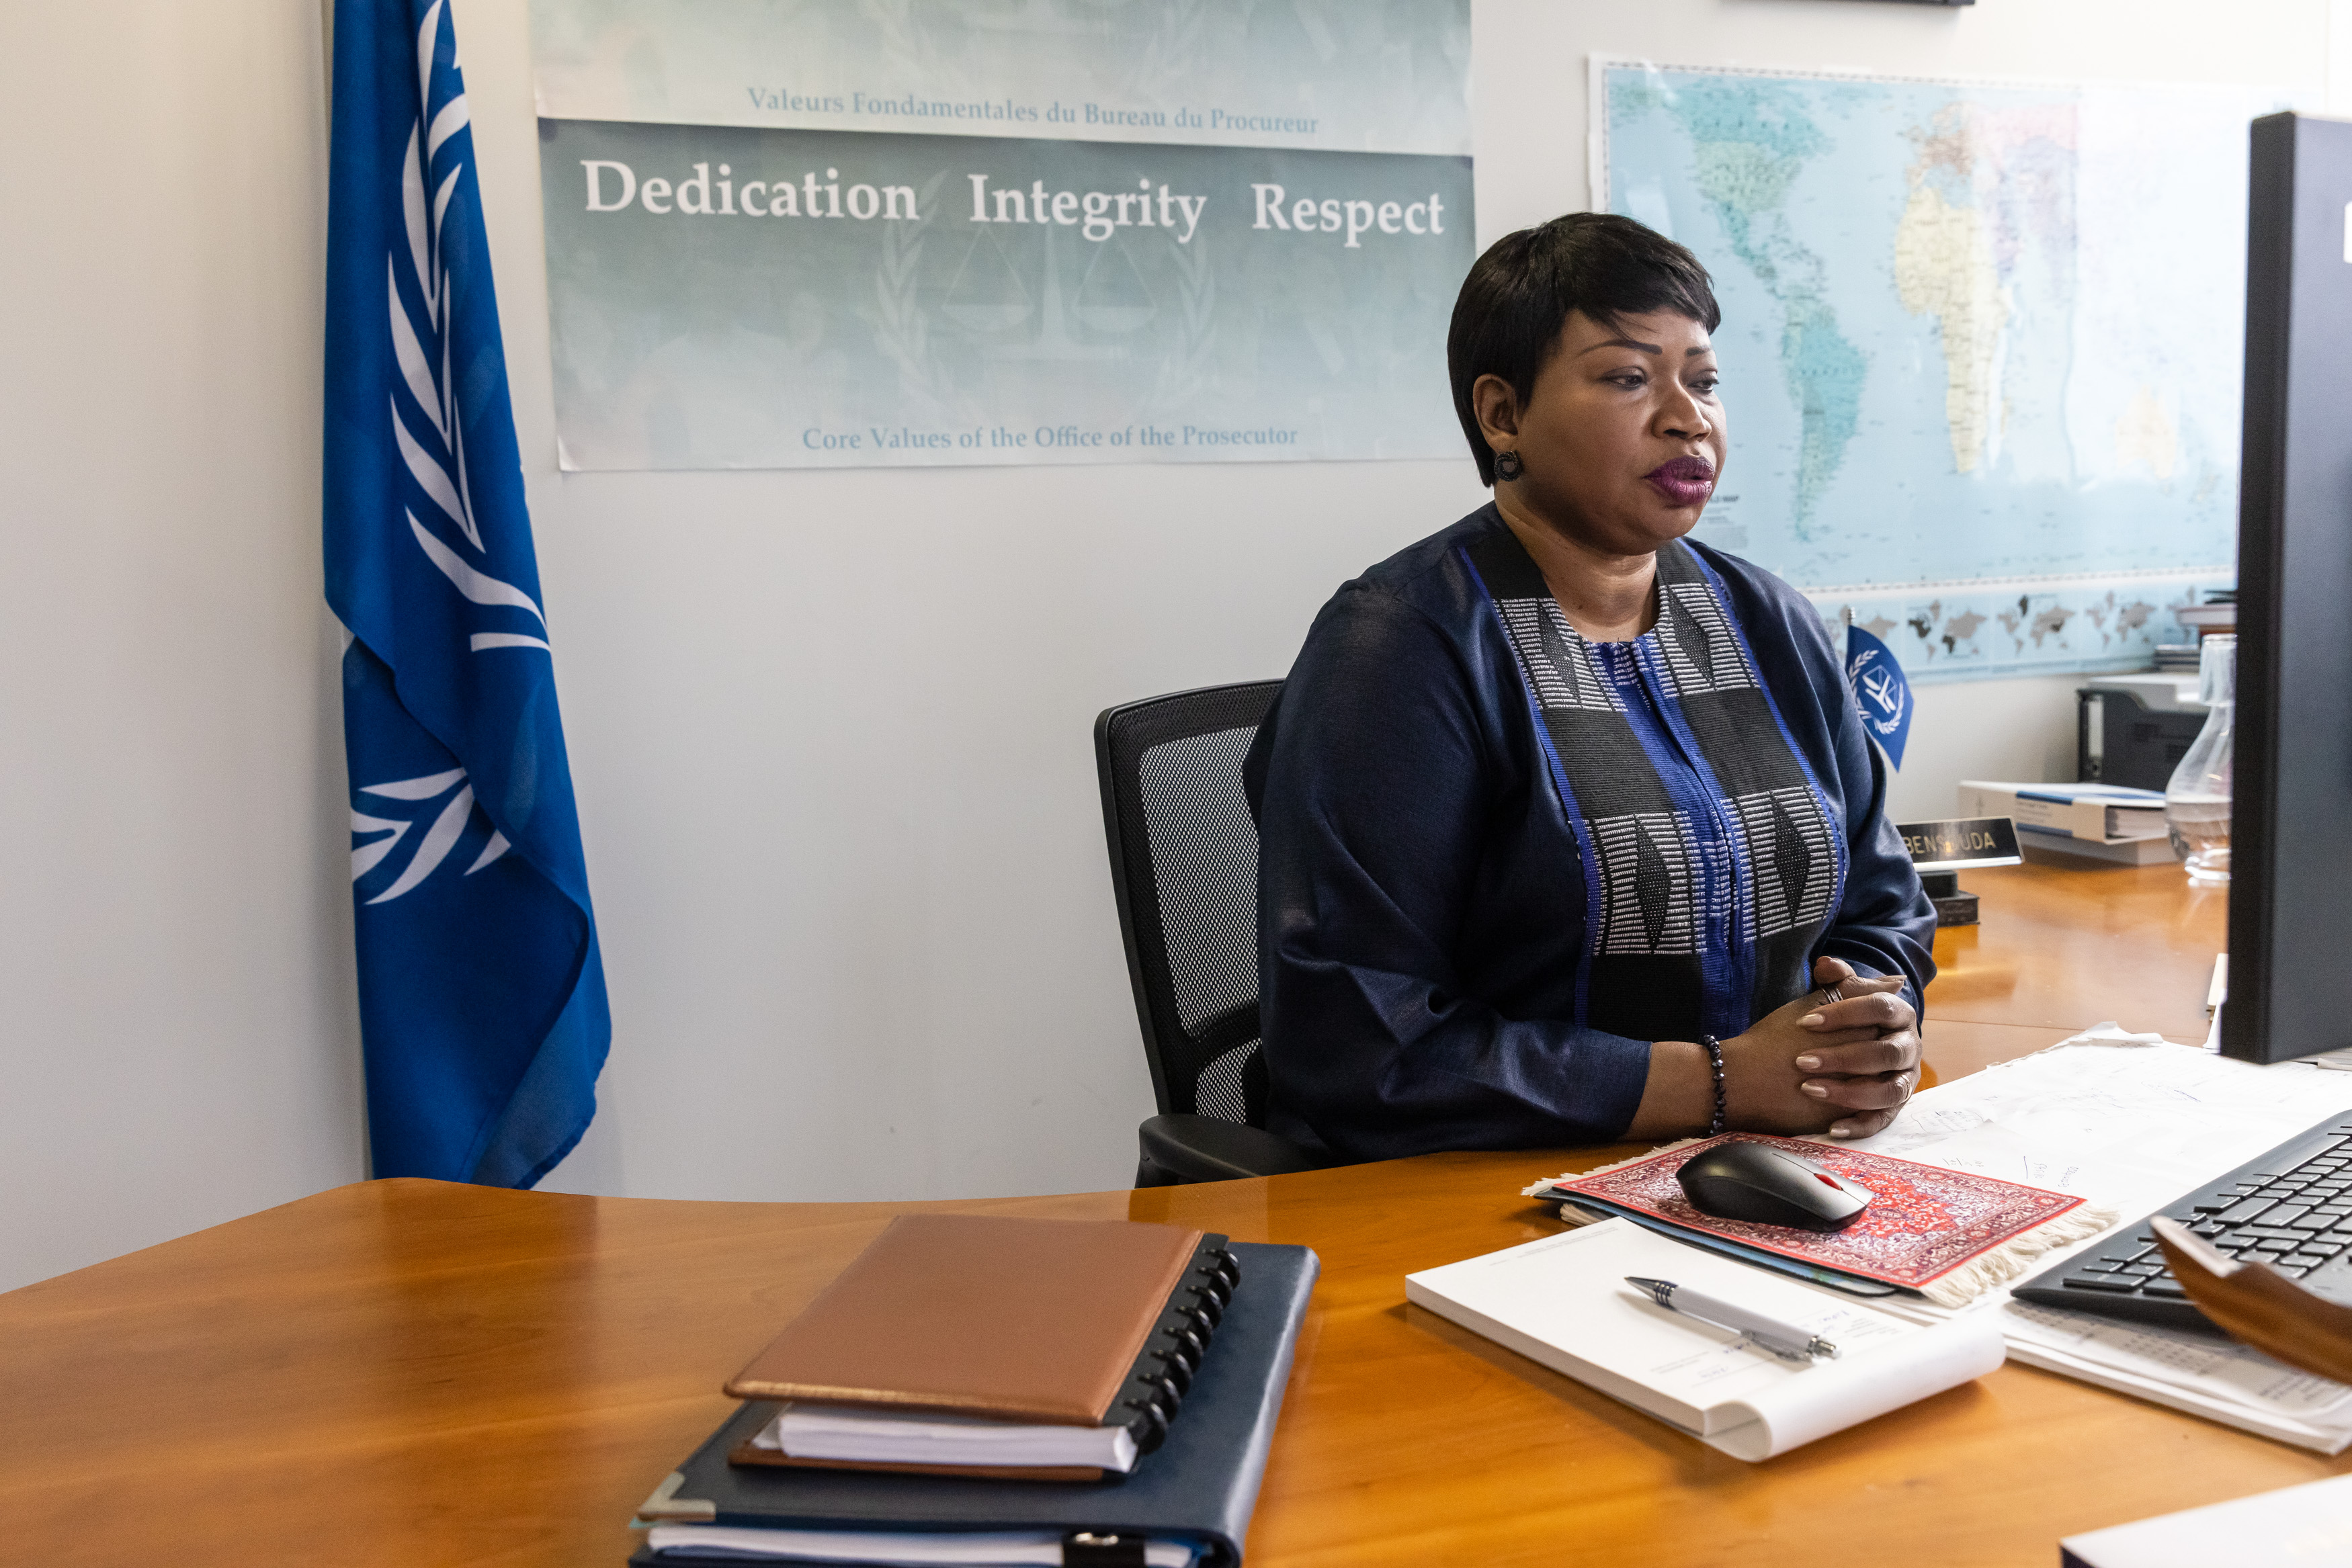 Due to COVID-19 restrictions, ICC Prosecutor, Fatou Bensouda, presents her Office’s 21th report on the Situation in Libya to the UN Security Council, remotely through VTC ©ICC-CPI